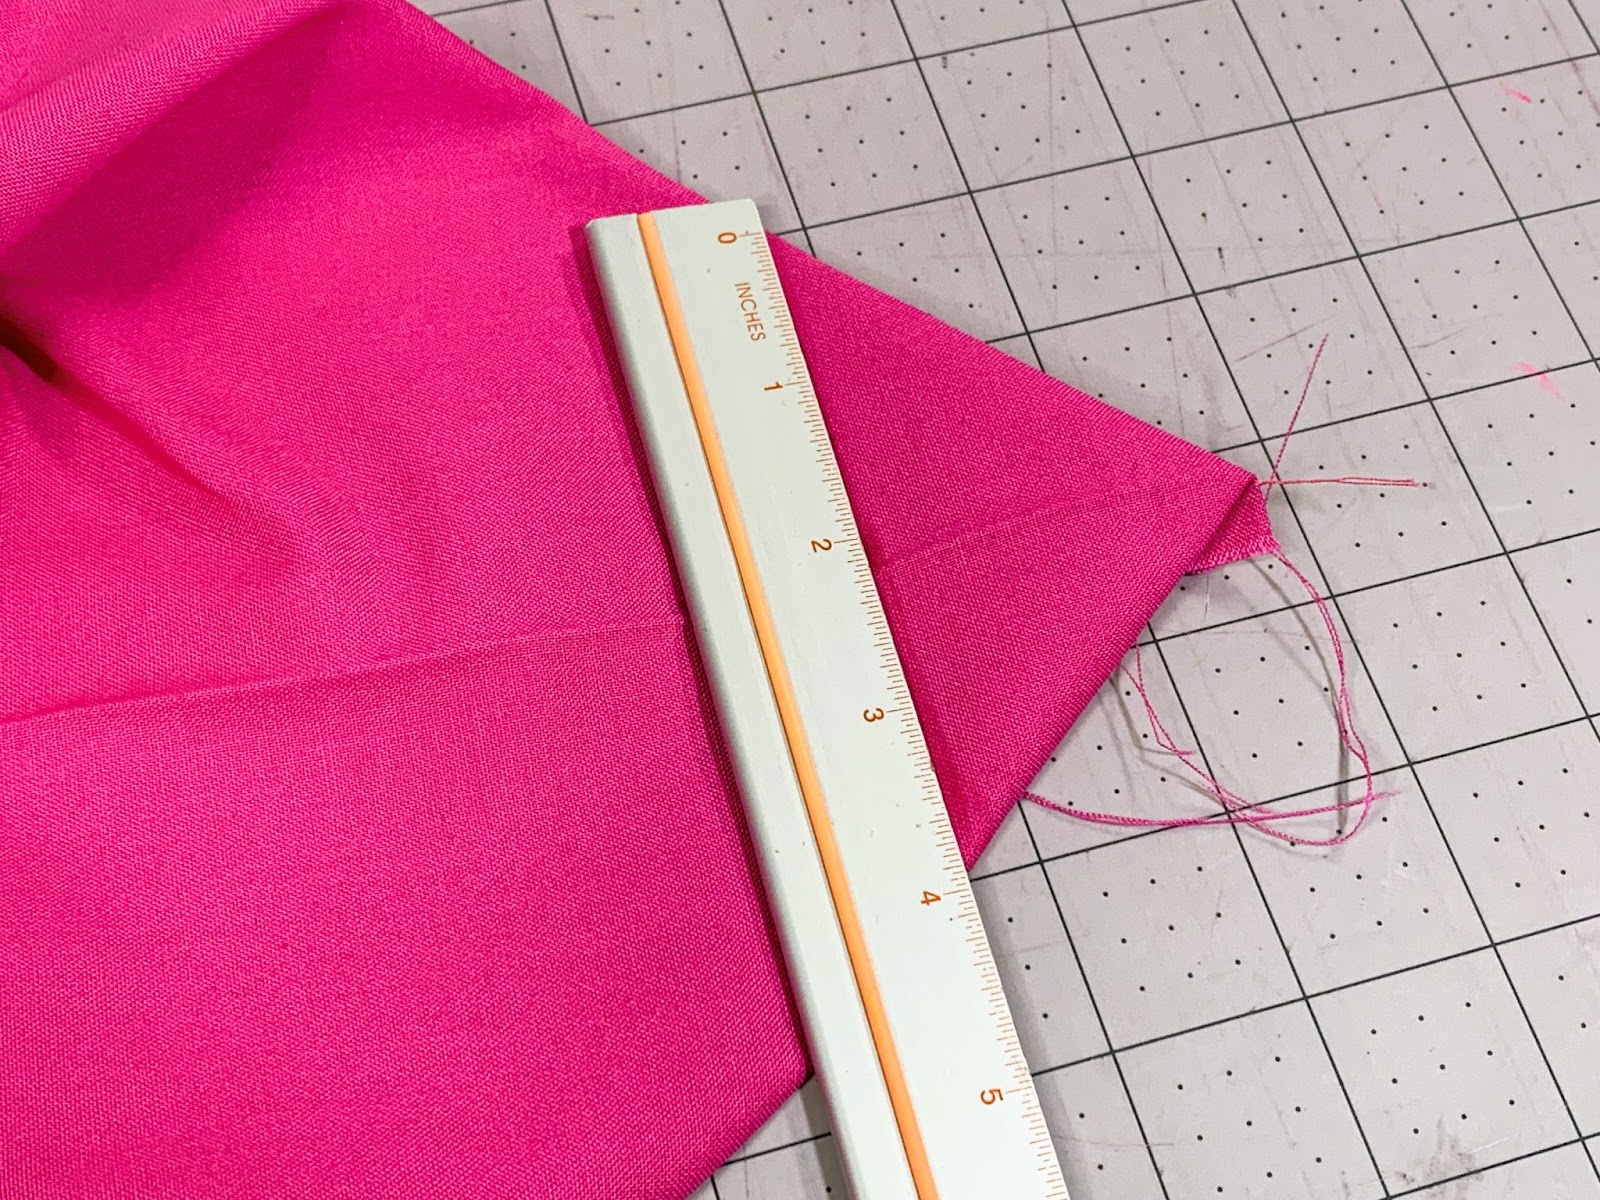 Corner of the lining fabric marked to trim